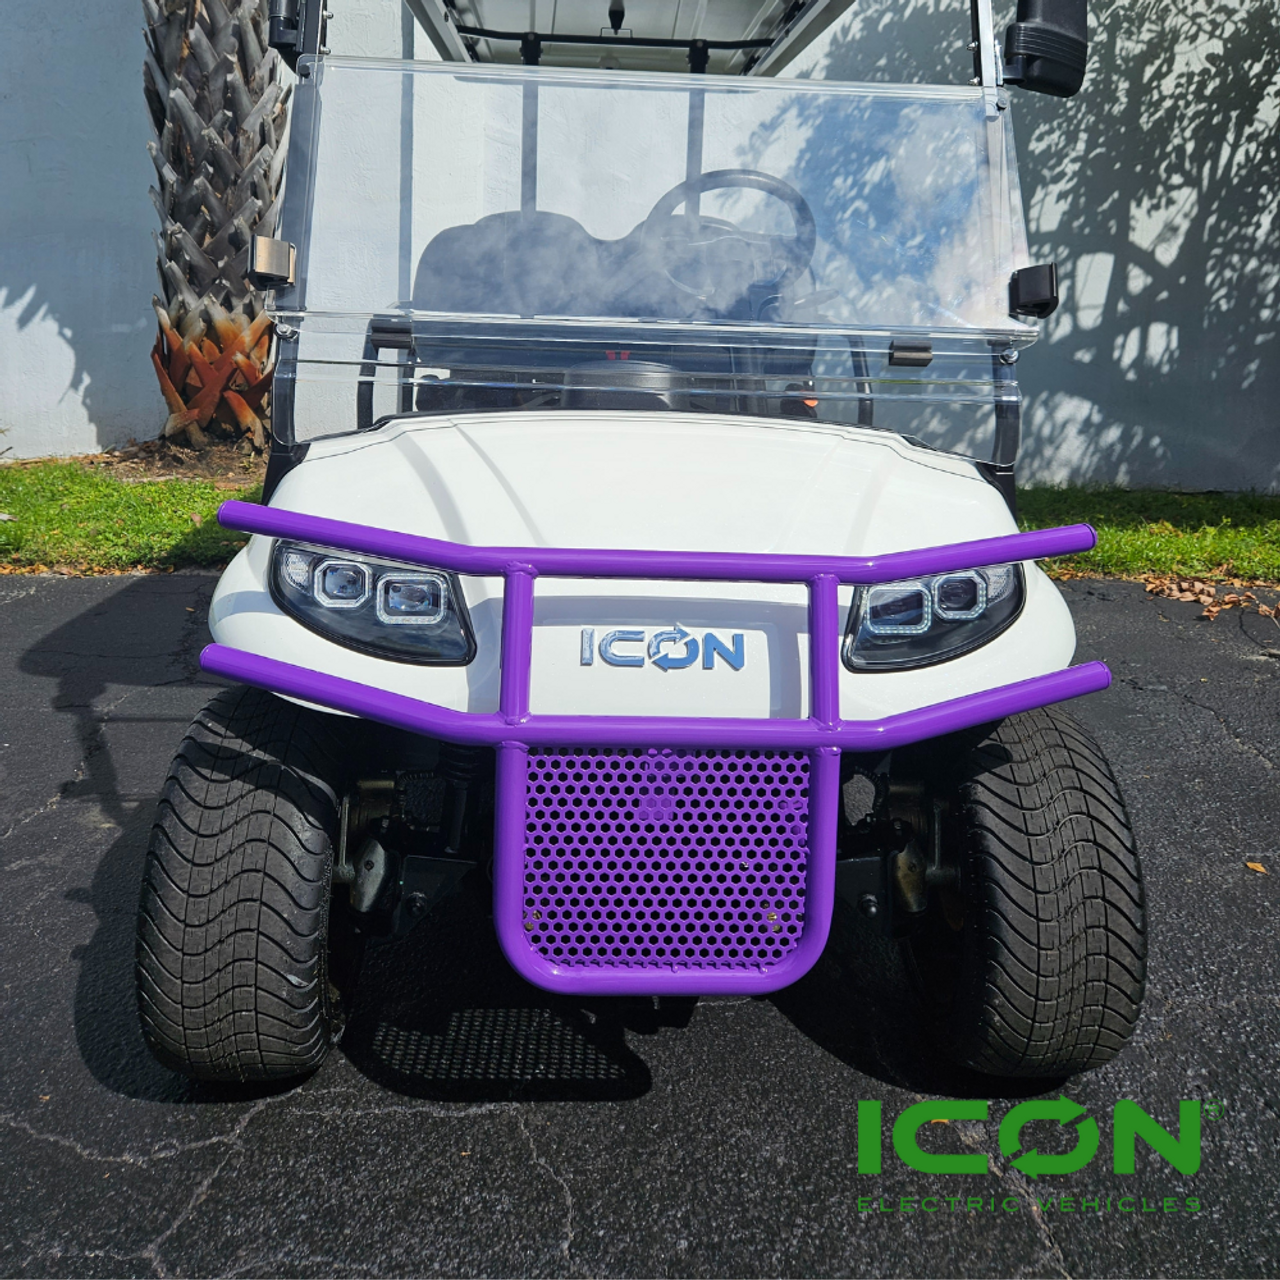 Purple Steel Brush Guard for ICON i20, i40, i60, i80 Non-Lifted Golf Cart Models, BRG-702-IC-PL, 2.08.001.000066